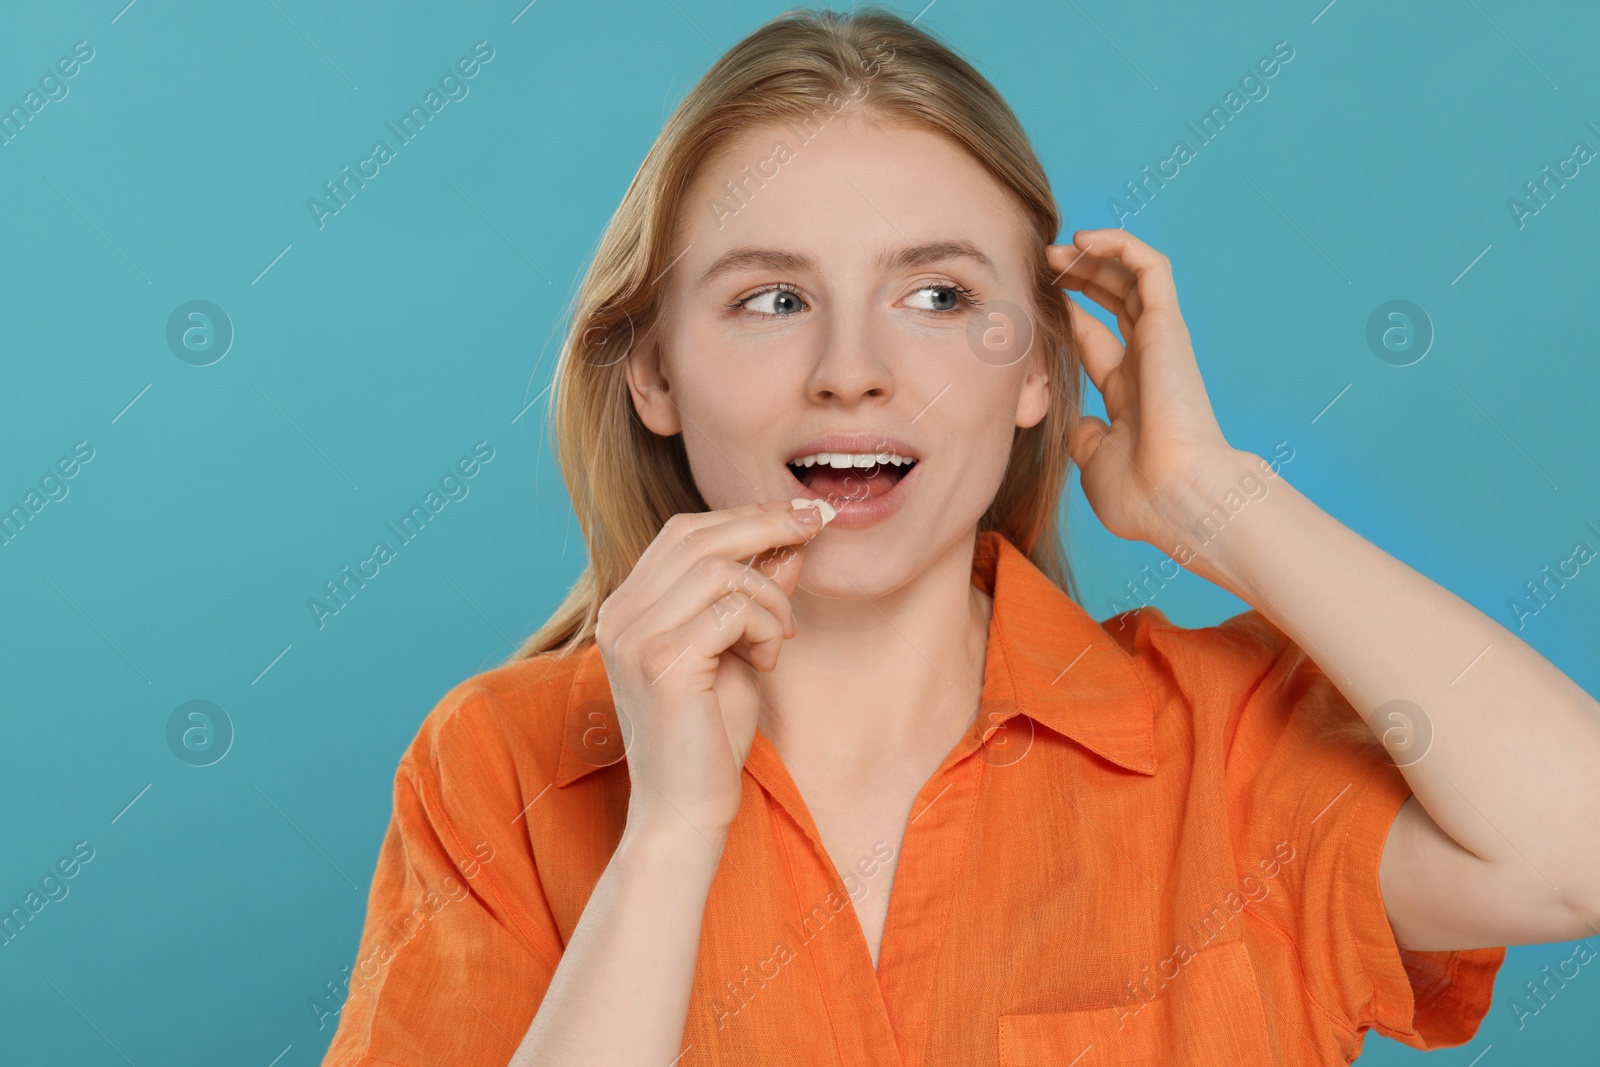 Photo of Happy young woman putting bubble gum into mouth on light blue background